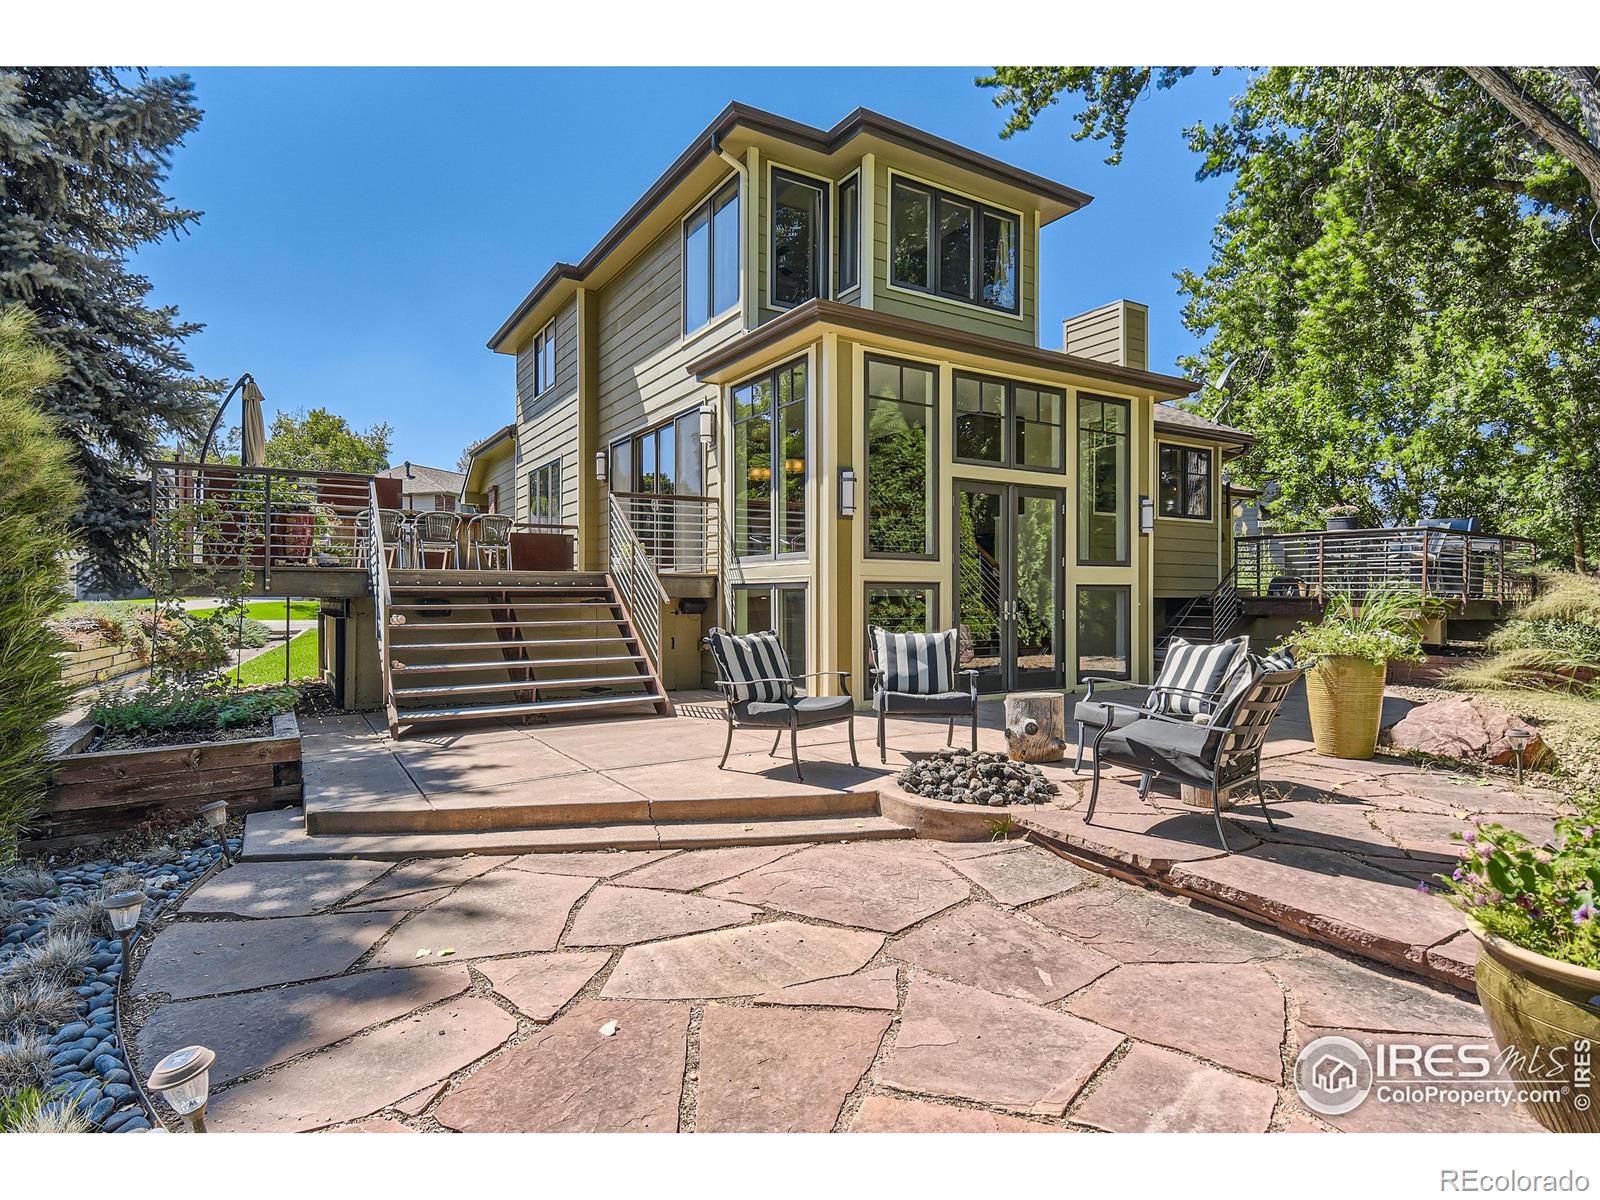 4246  Southshore Court, fort collins MLS: 123456789996181 Beds: 4 Baths: 4 Price: $1,500,000